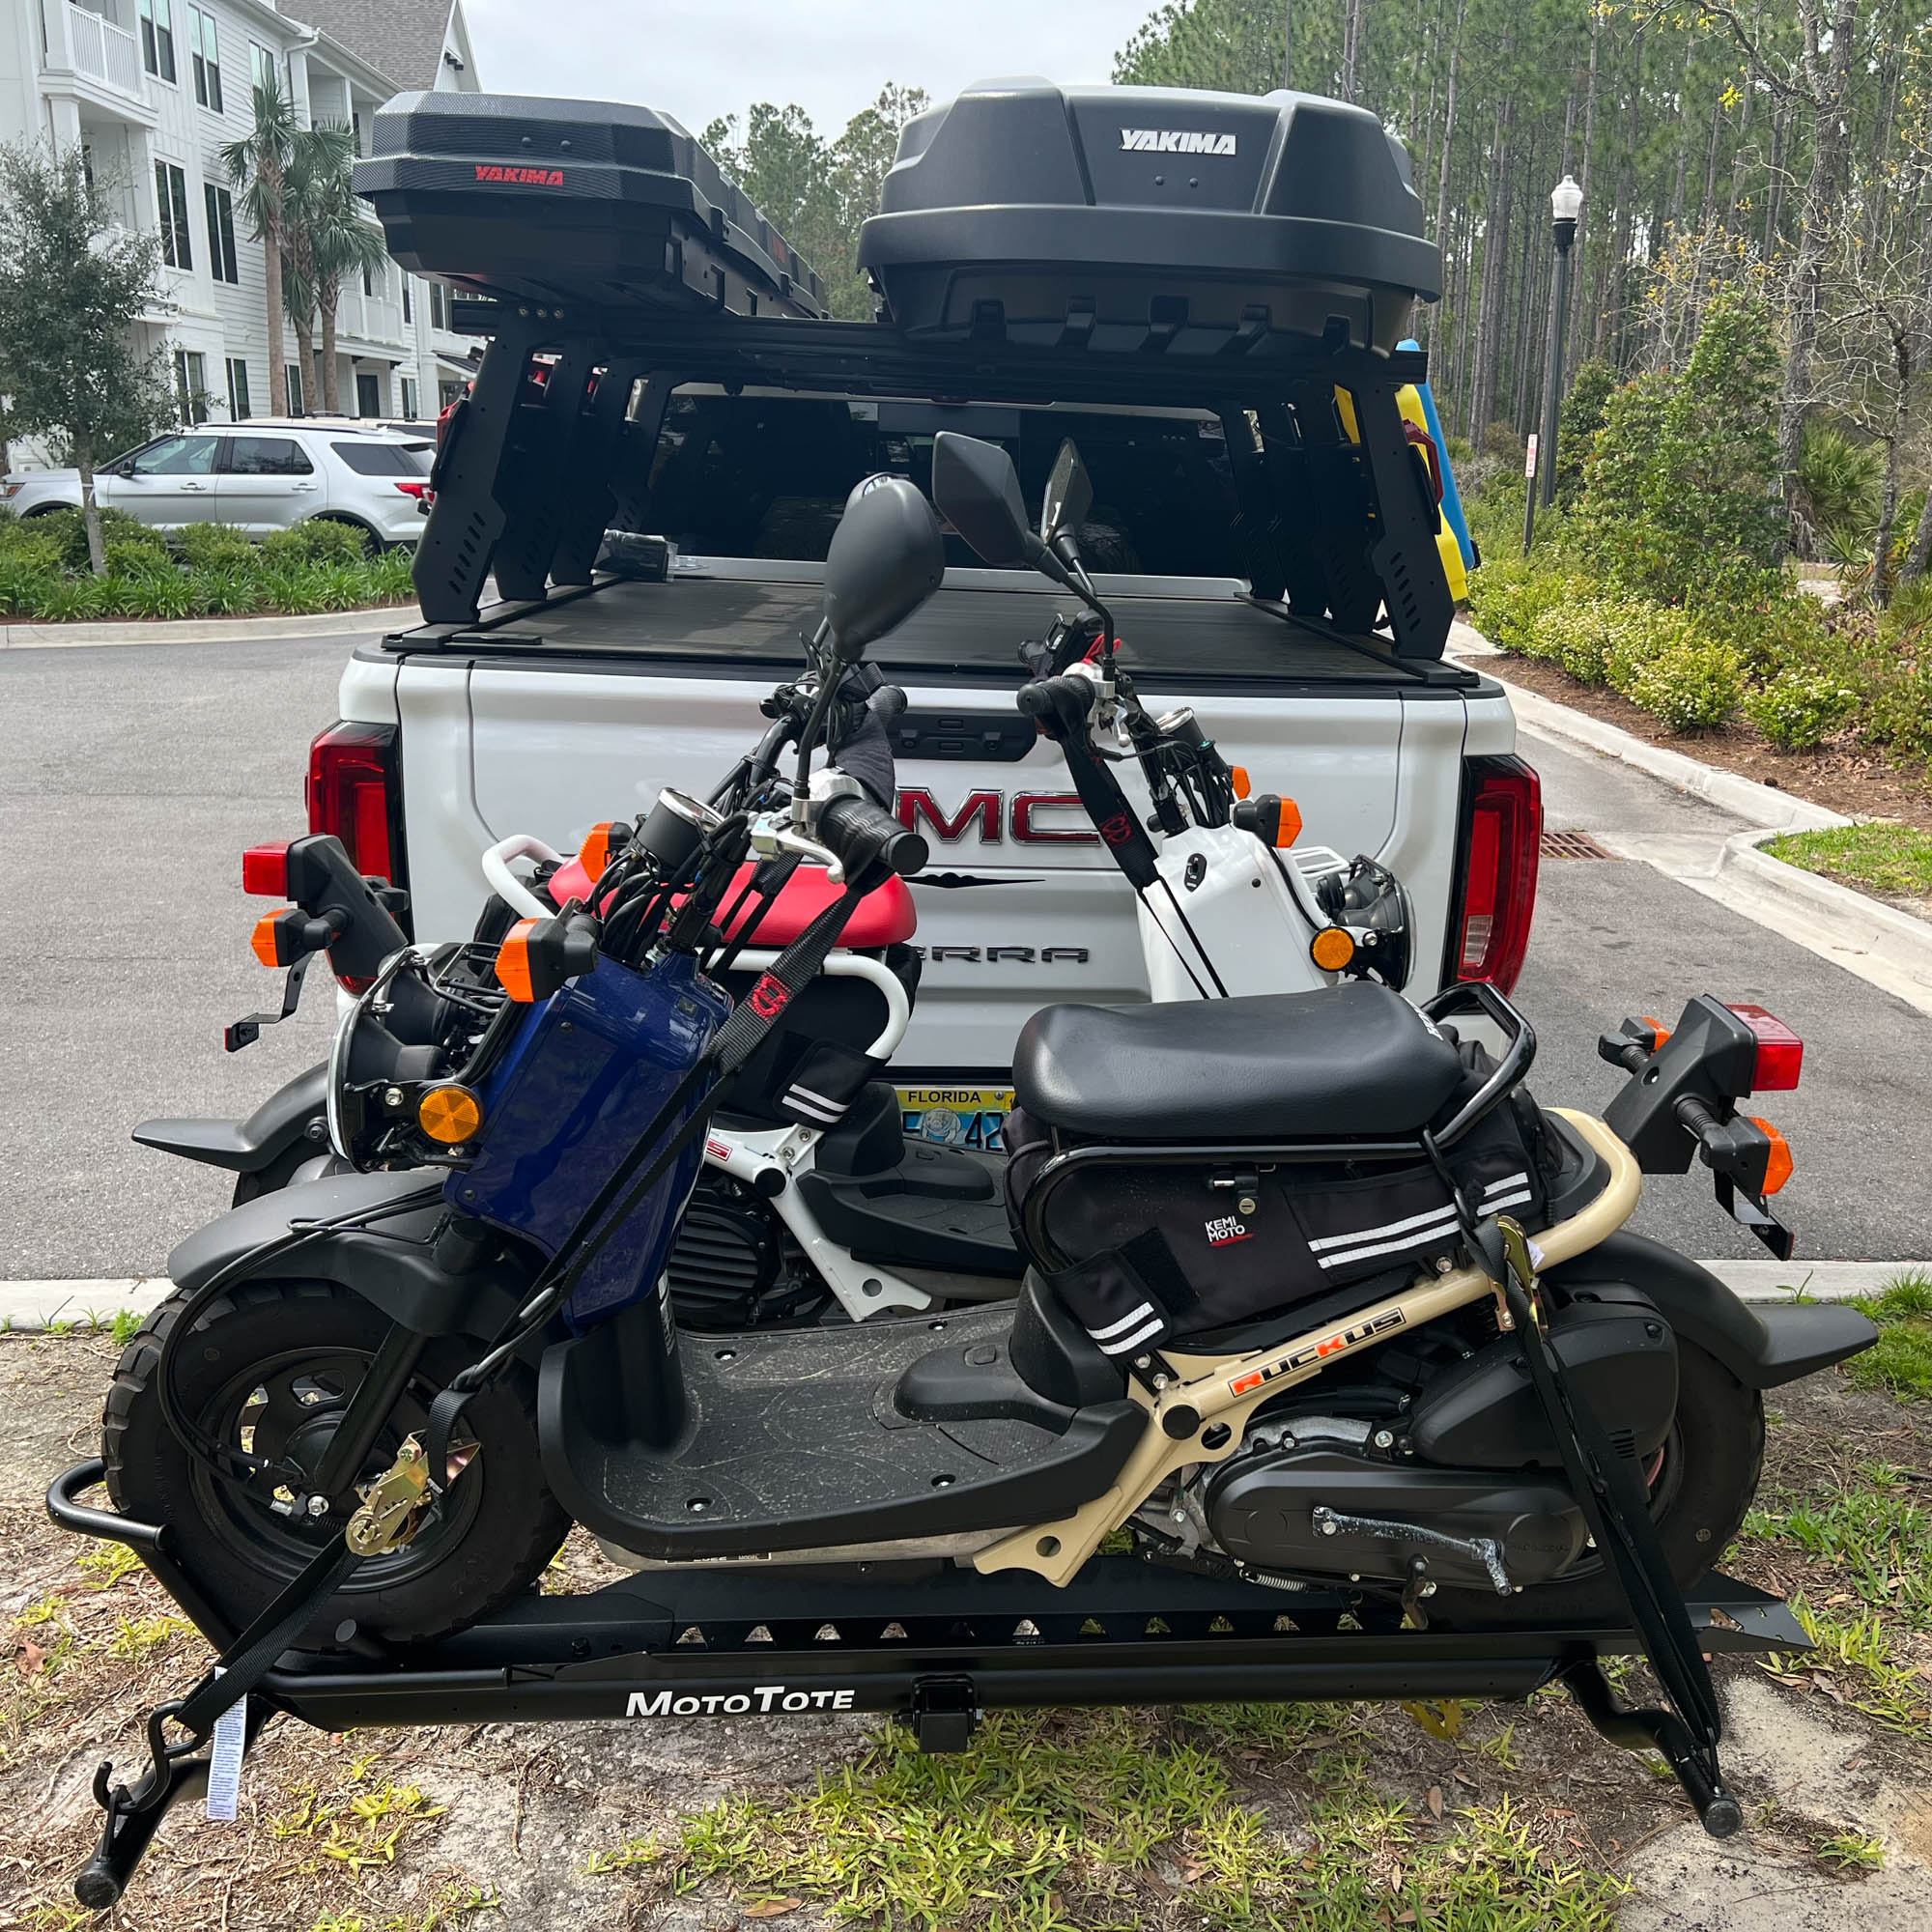 Are Double Motorcycle Hitch Carriers Safe?